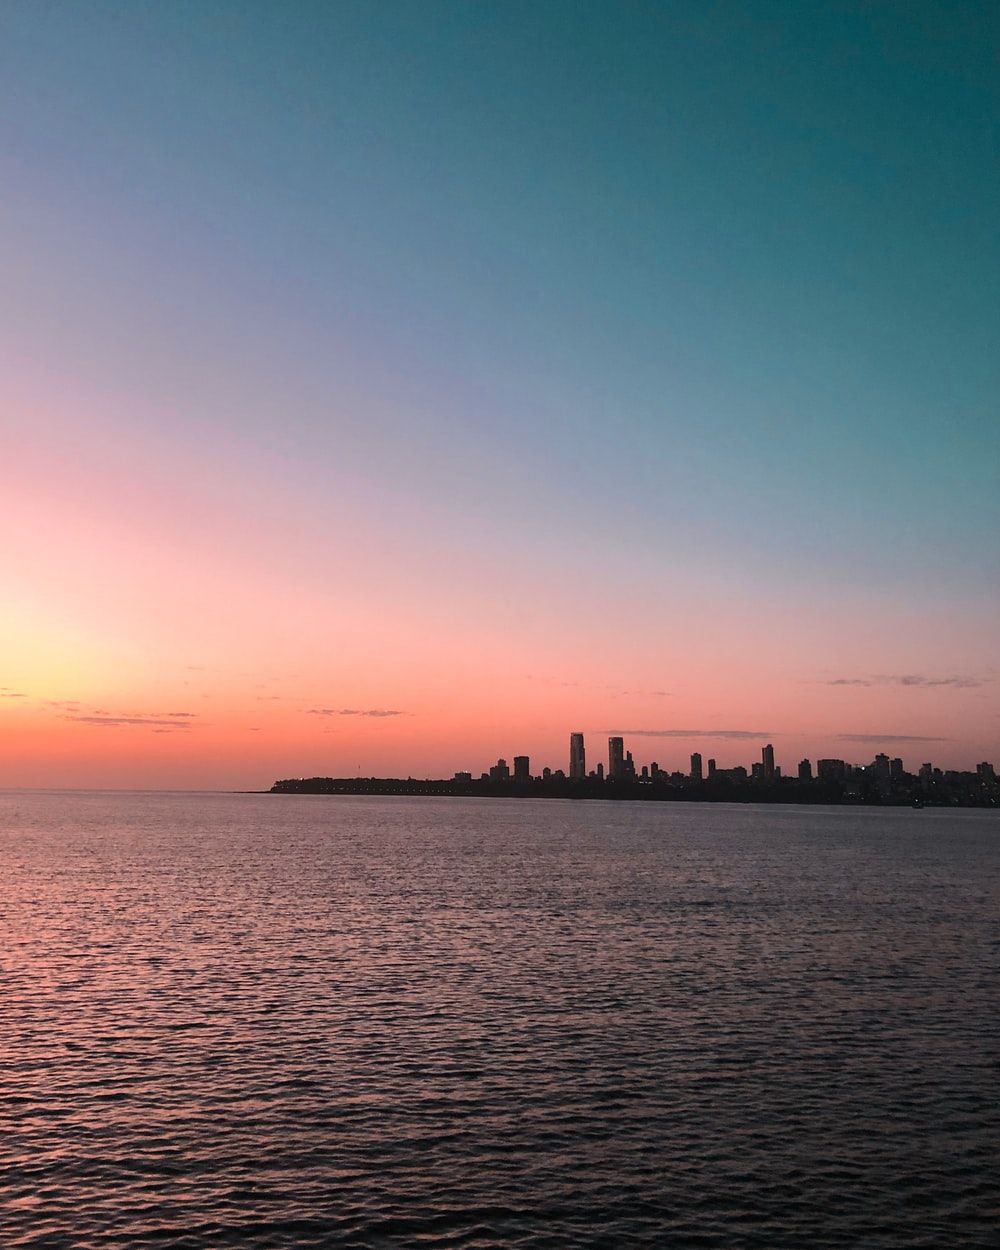 Marine Drive Picture. Download Free Image